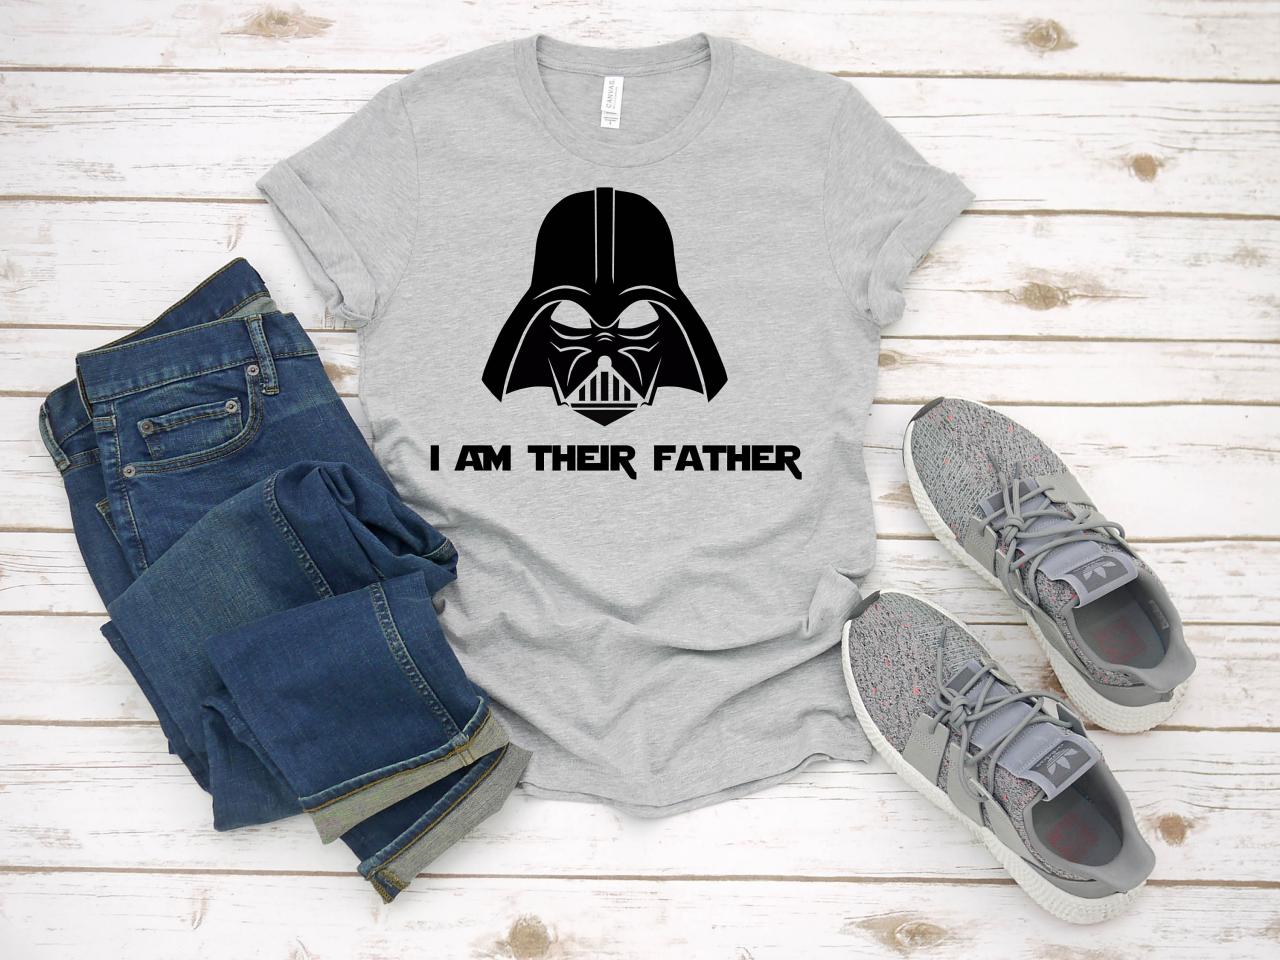 T-shirt For Dad | Men T-shirt I Am Their Father T-shirt| Darth Vader| Star Wars| Daddy Shirt| Father's Day Gift| Men's Gift|